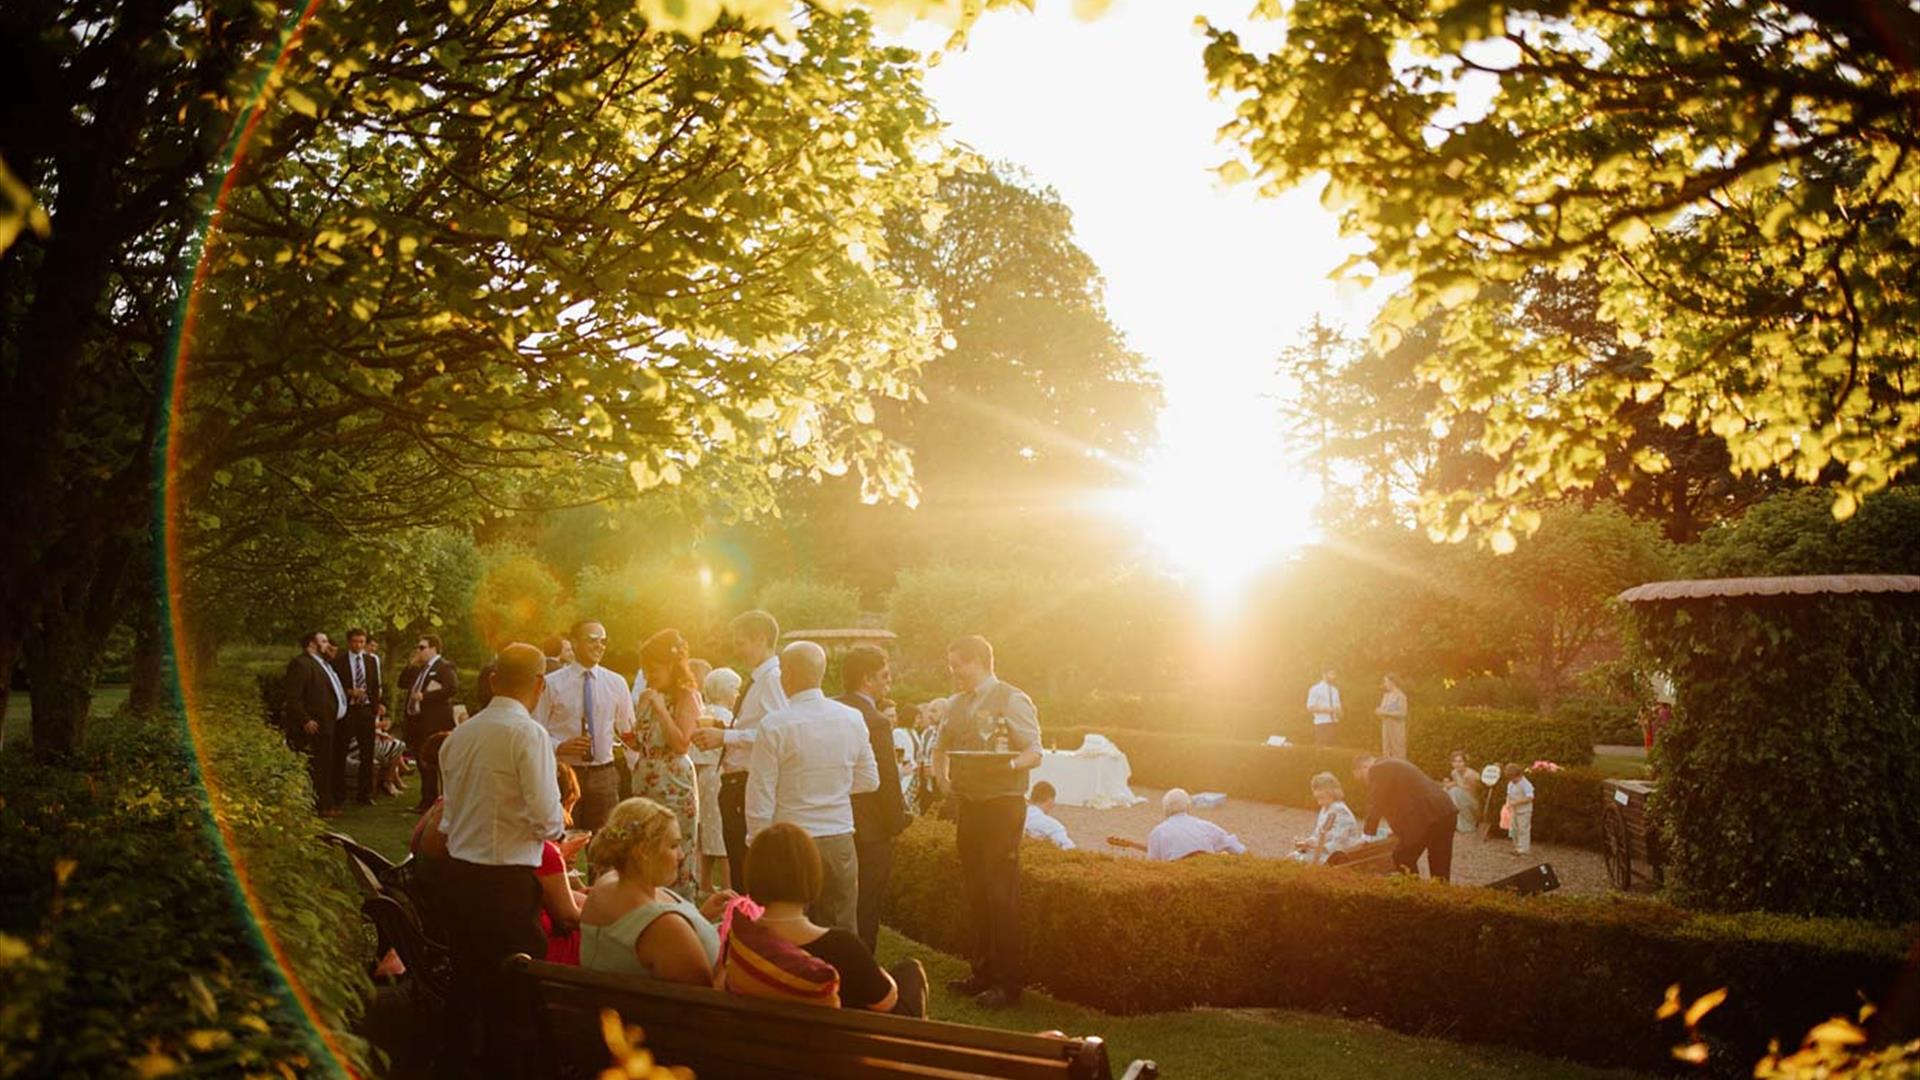 Image shows a beautiful garden with people gathering around and the sun shining through the trees